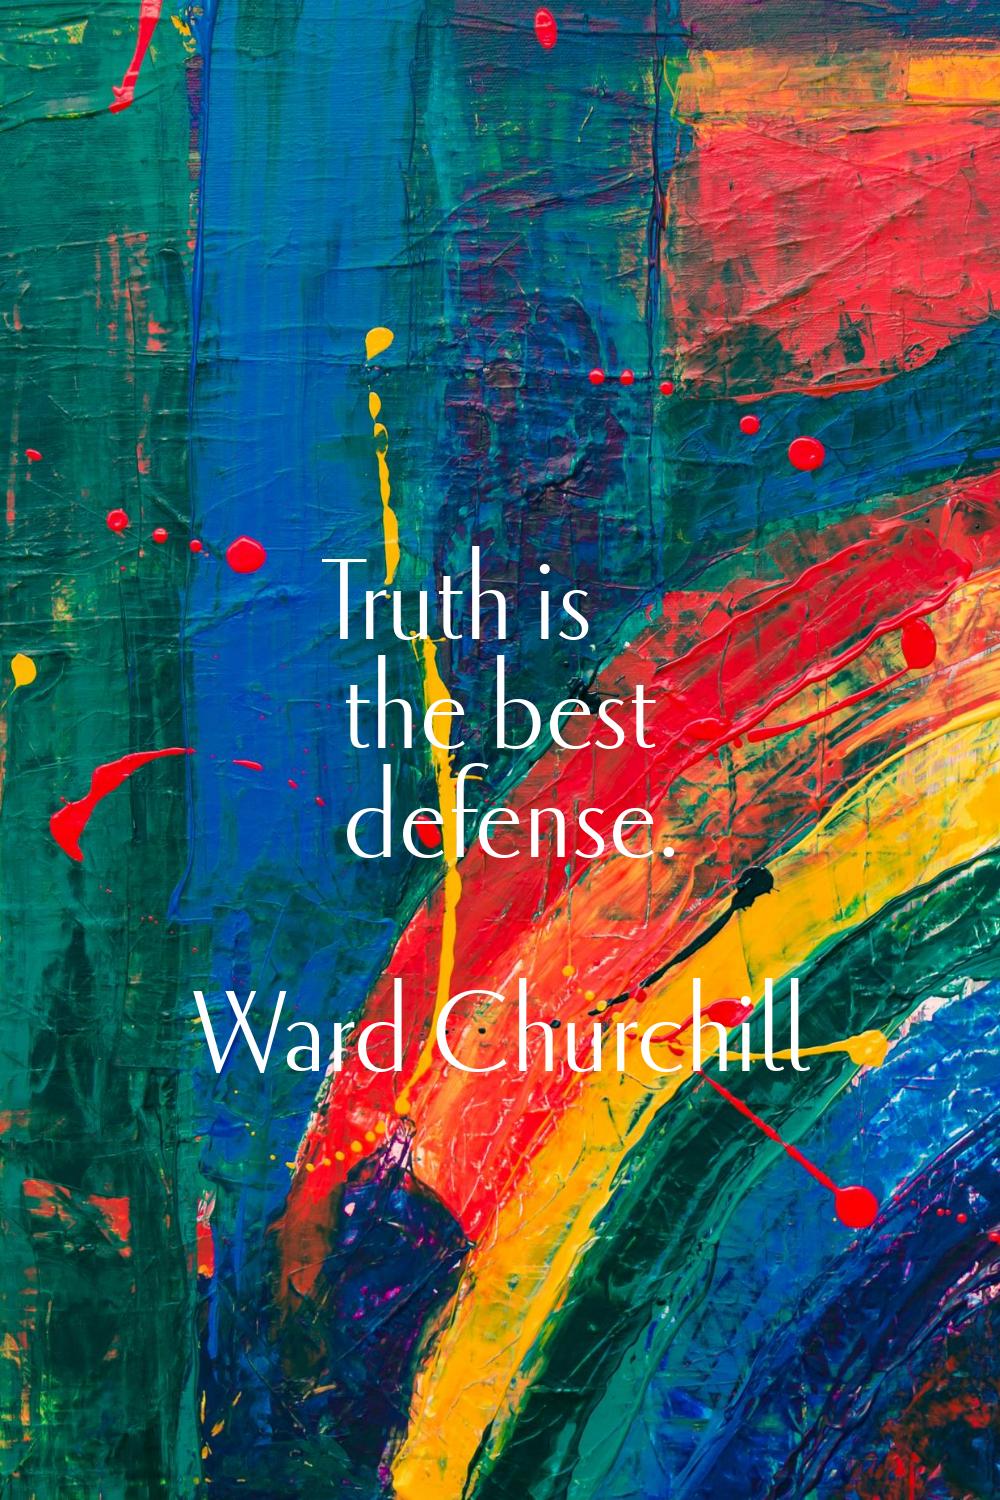 Truth is the best defense.